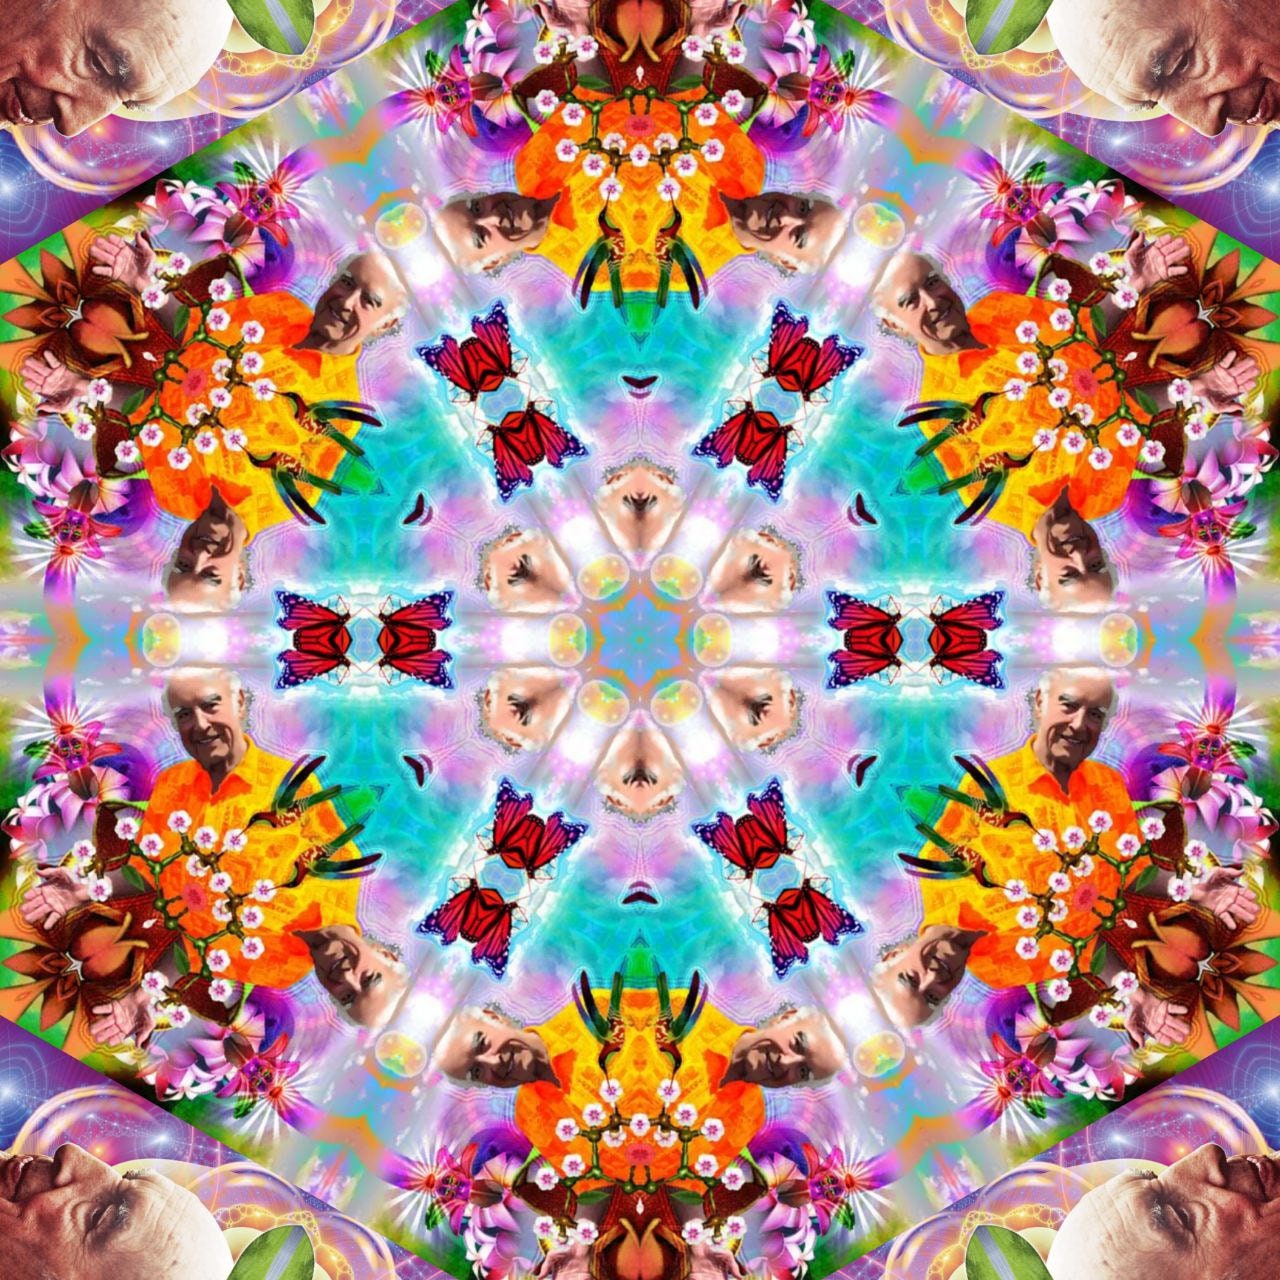 Psychedelic Bicycle Day Albert Hofmann LSD embroidery Patch Hippie Timothy Leary Consciousness expansion Psytrance Goatrance Therapy Healing